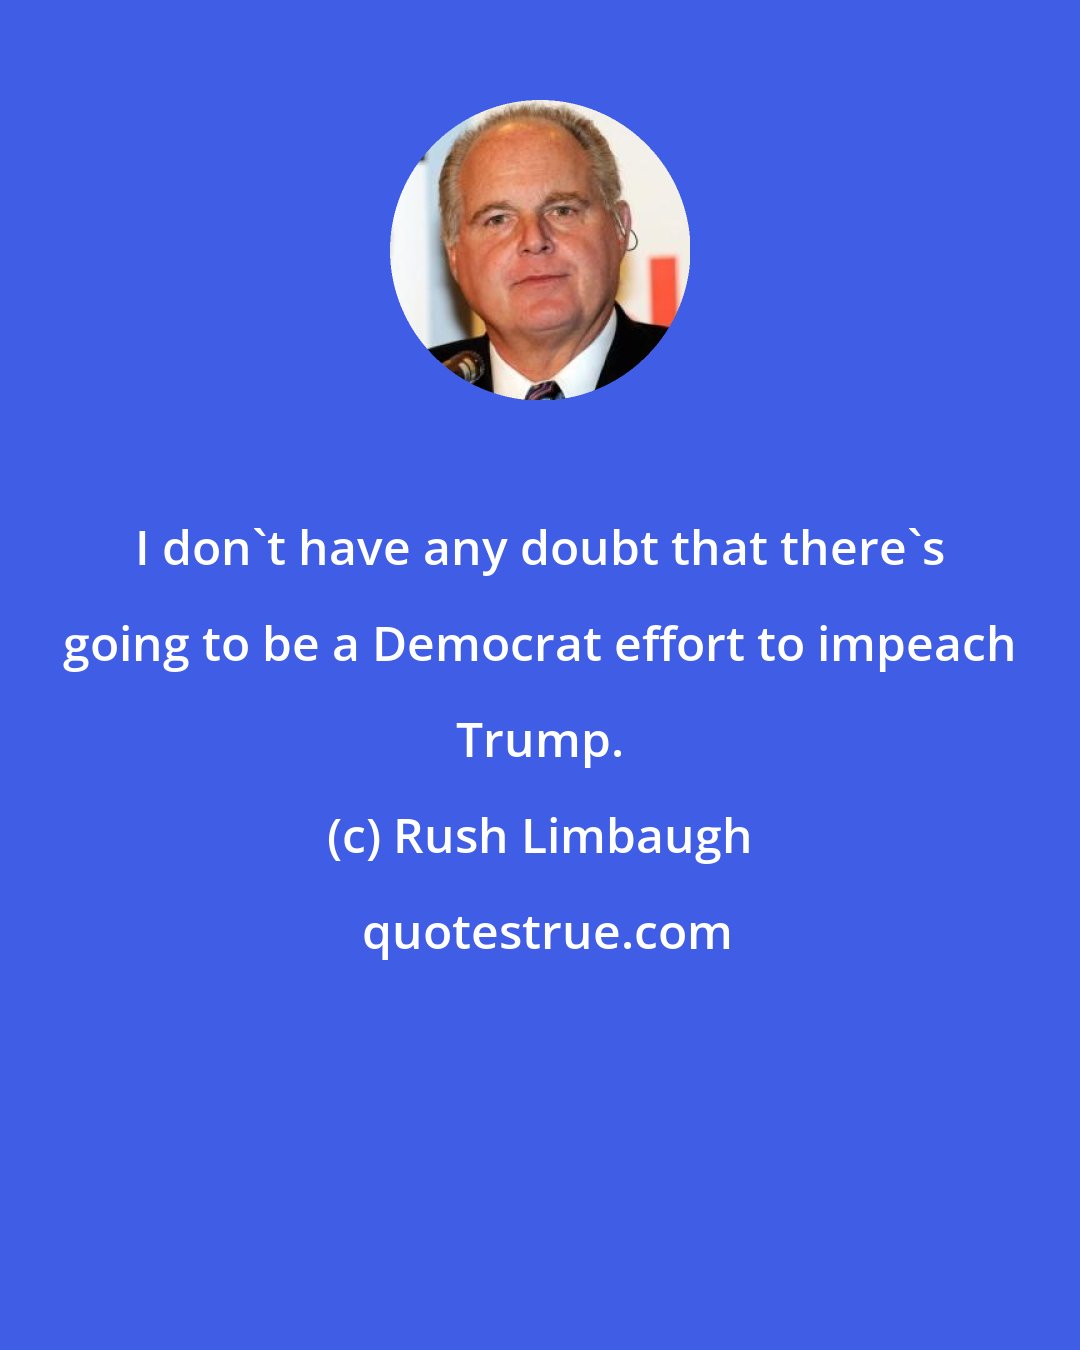 Rush Limbaugh: I don't have any doubt that there's going to be a Democrat effort to impeach Trump.